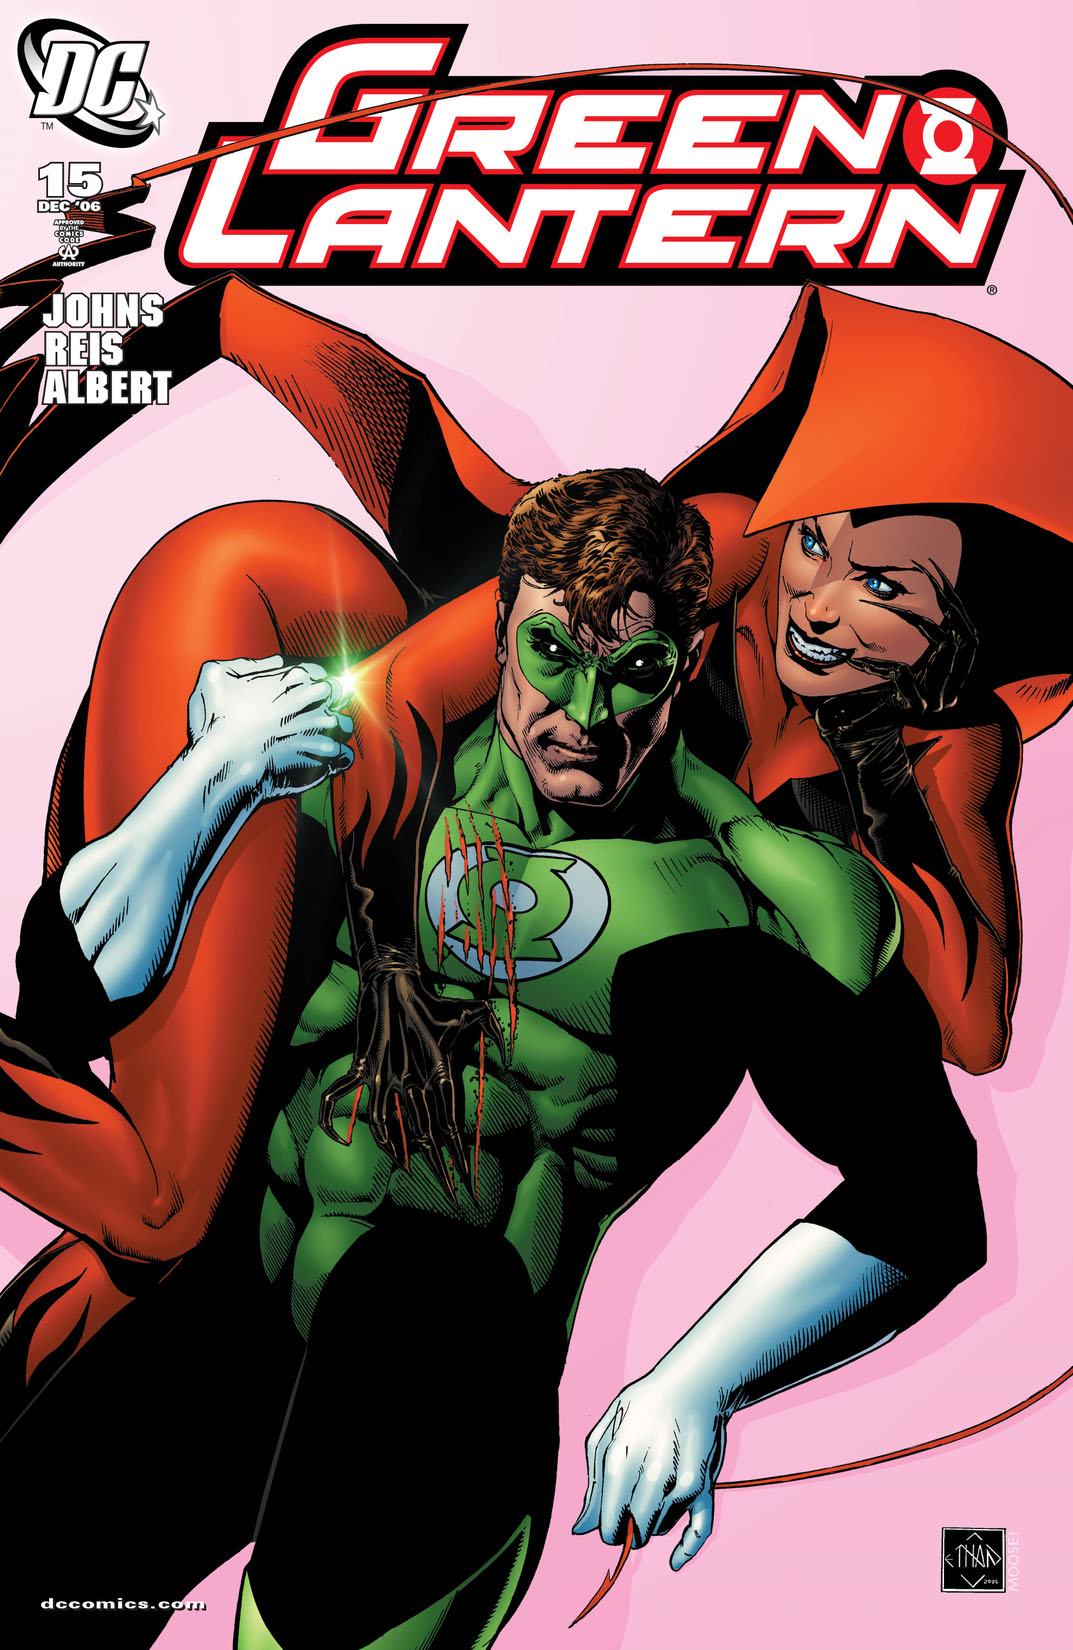 Green Lantern (2005-) #15 preview images